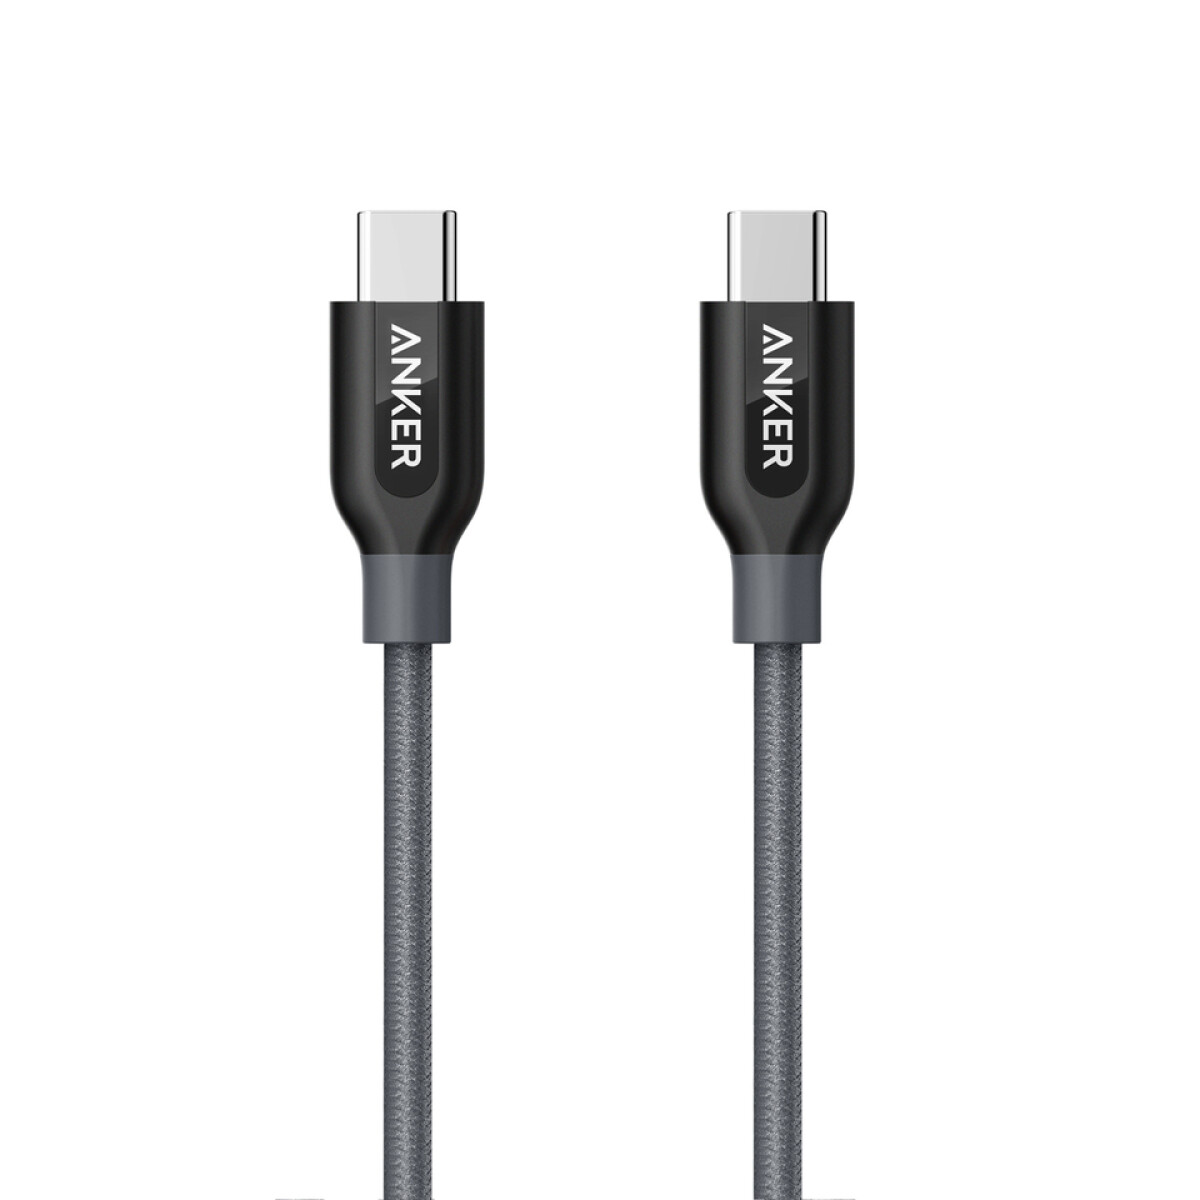 Cable Powerline+ III USB-C to USB-C 0.9m 2.0 Cable (3ft) Black 